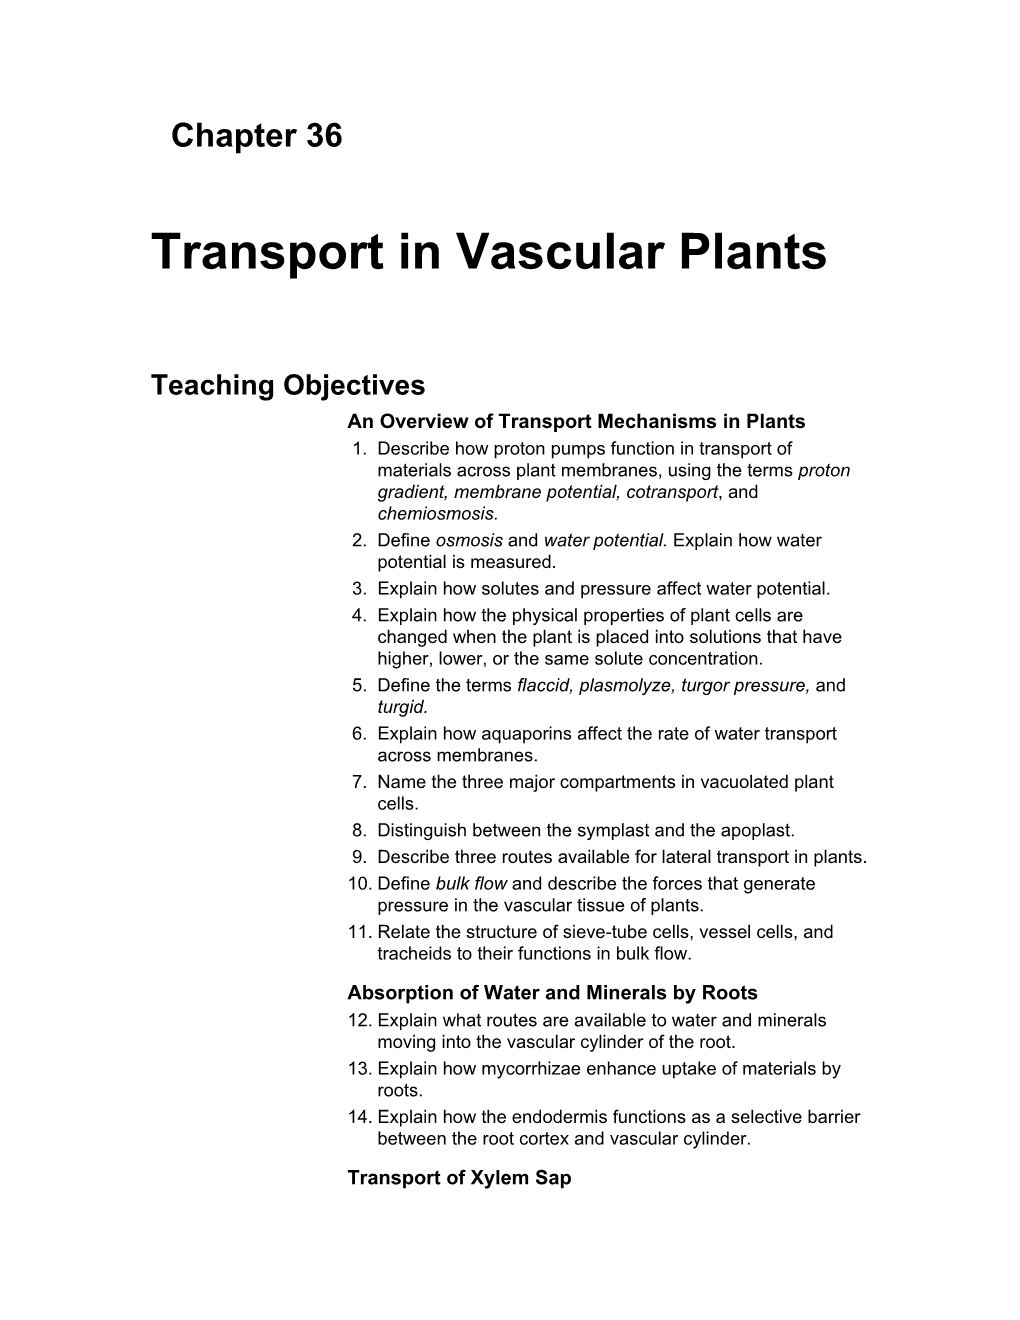 An Overview of Transport Mechanisms in Plants